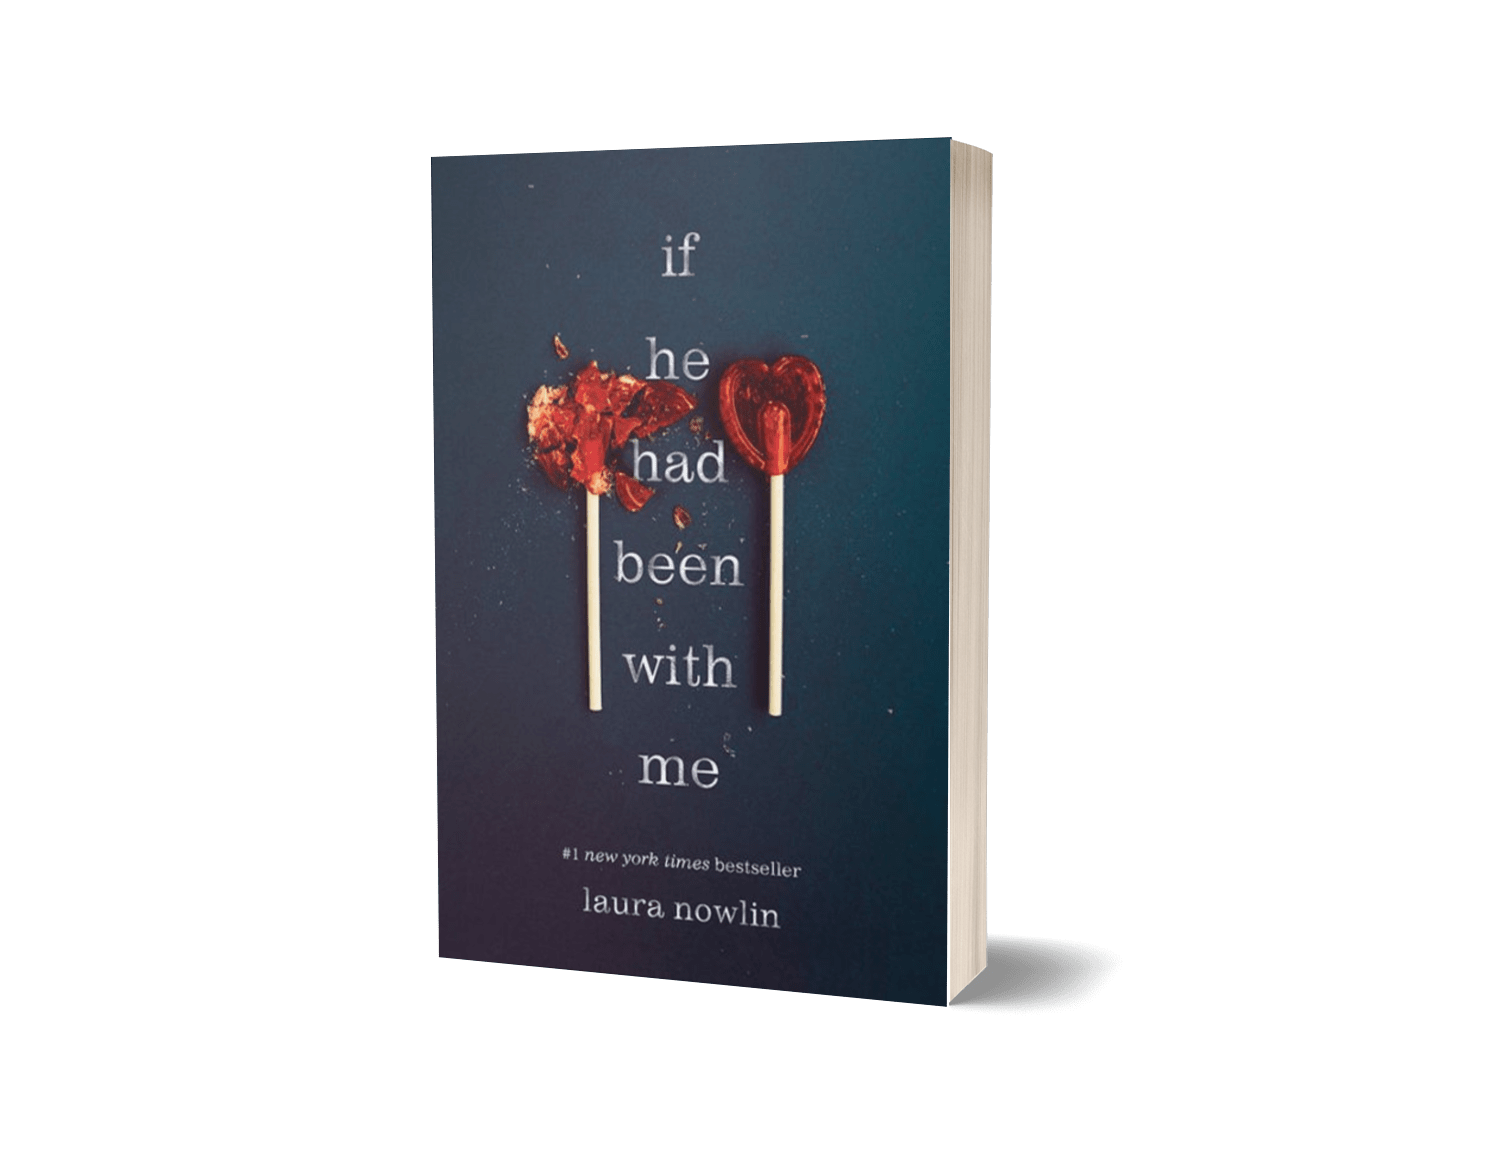 If he had been with me by Laura Nowiln